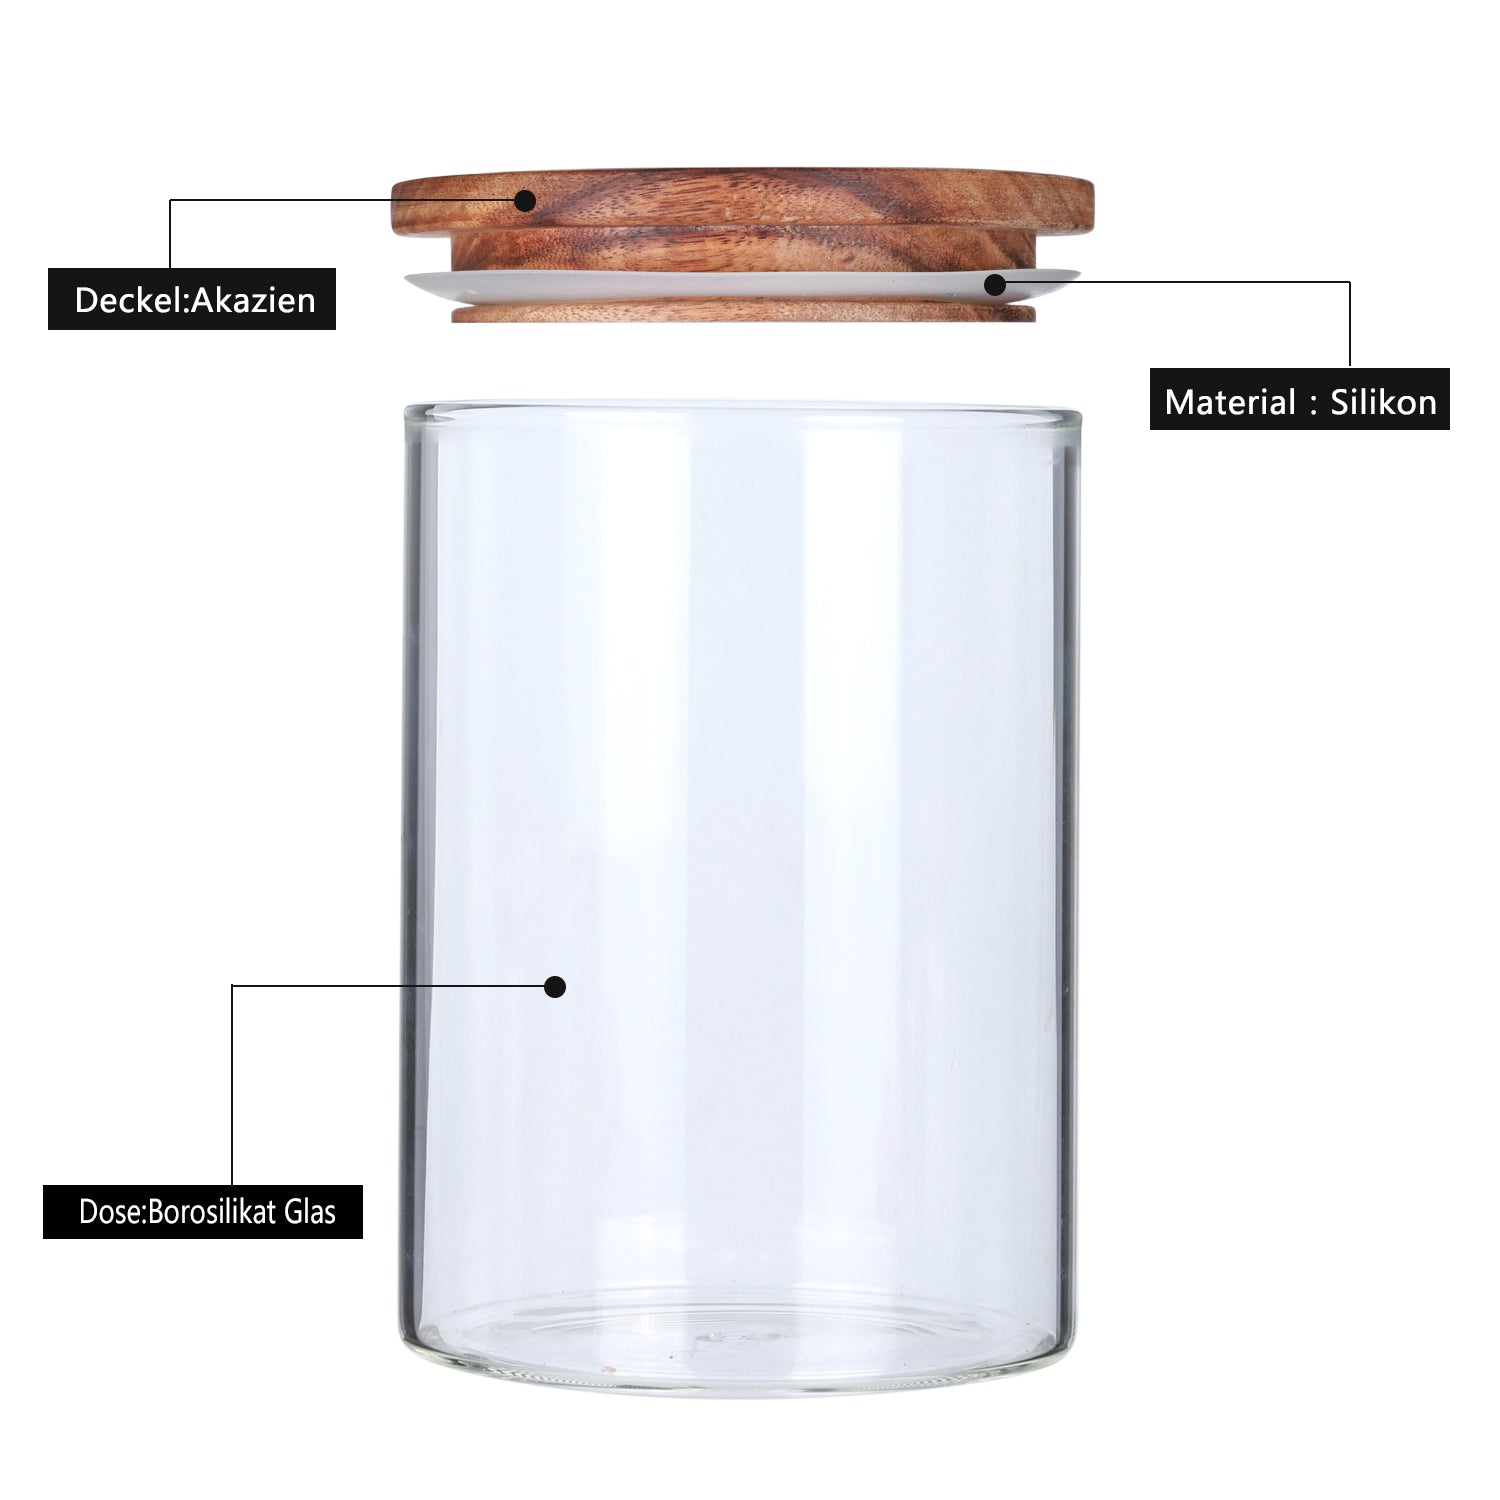 10 oz Clear Glass Tall Borosilicate Jar with Bamboo Lid (6 Pack)